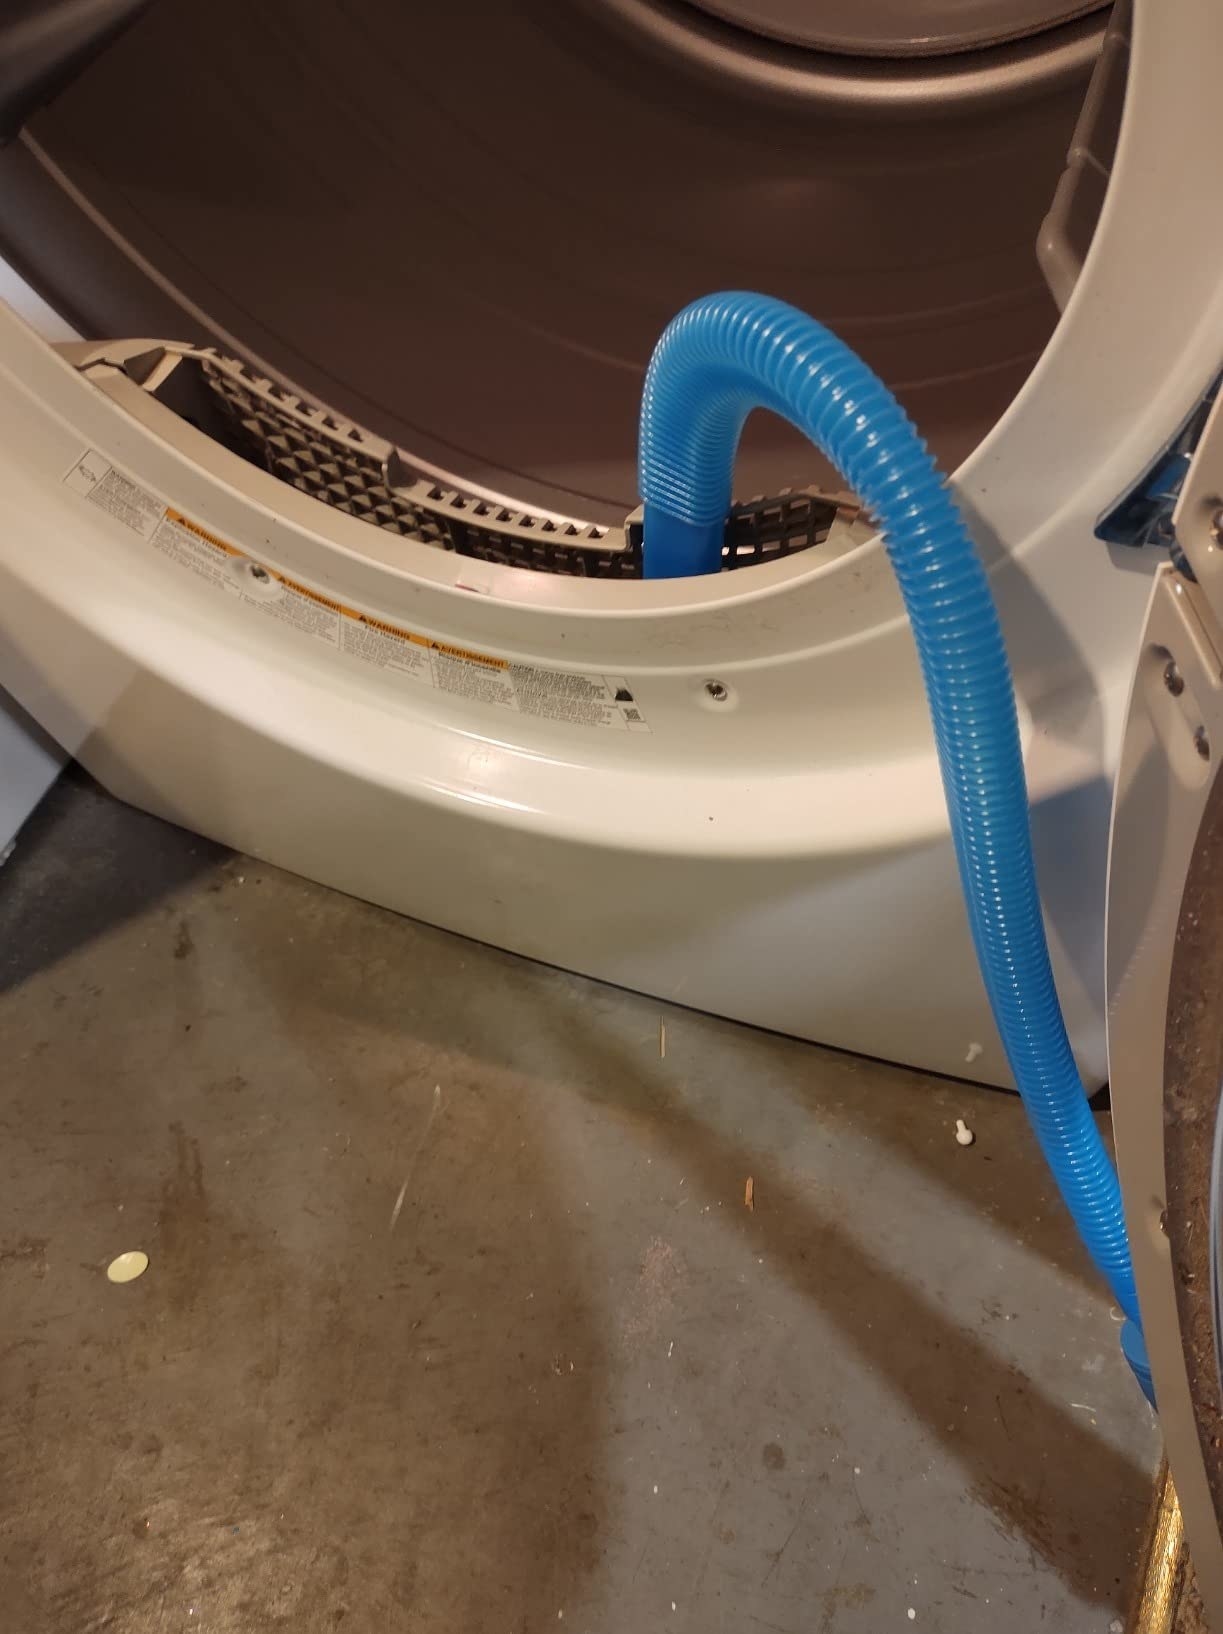 a reviewer photo of the blue vacuum tube in the lint trap of a dryer